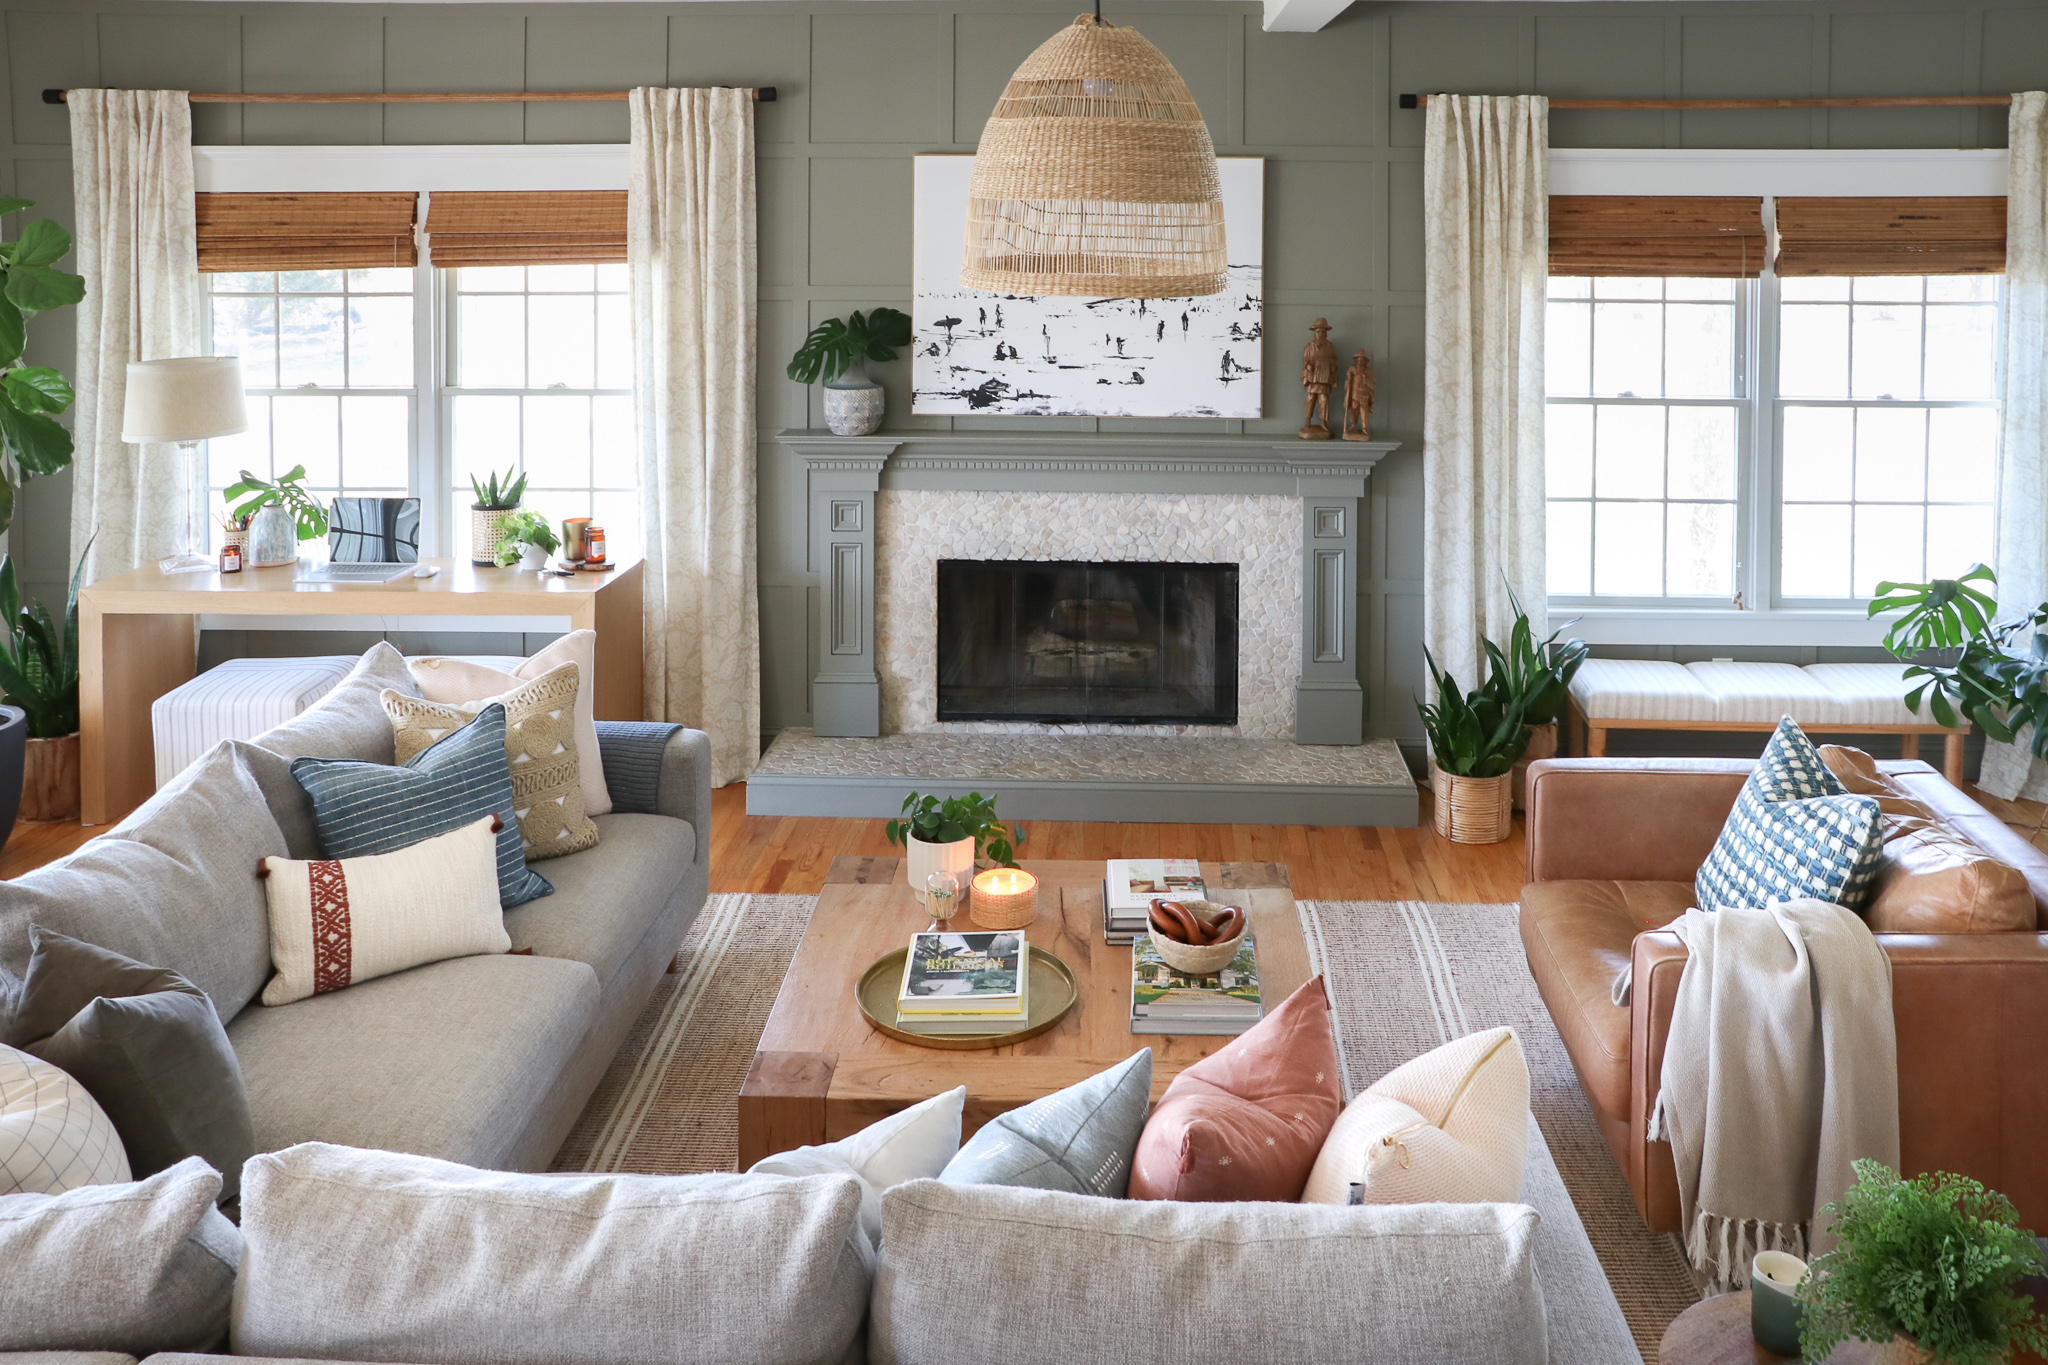 Family Room Reveal-Bridgerton Meets the Long Island Coast. Rug Malta/Natural by Annie Selke. Antionette drapes and pillows by Annie Selke. Paint is Desert Twilight Benjamin Moore.